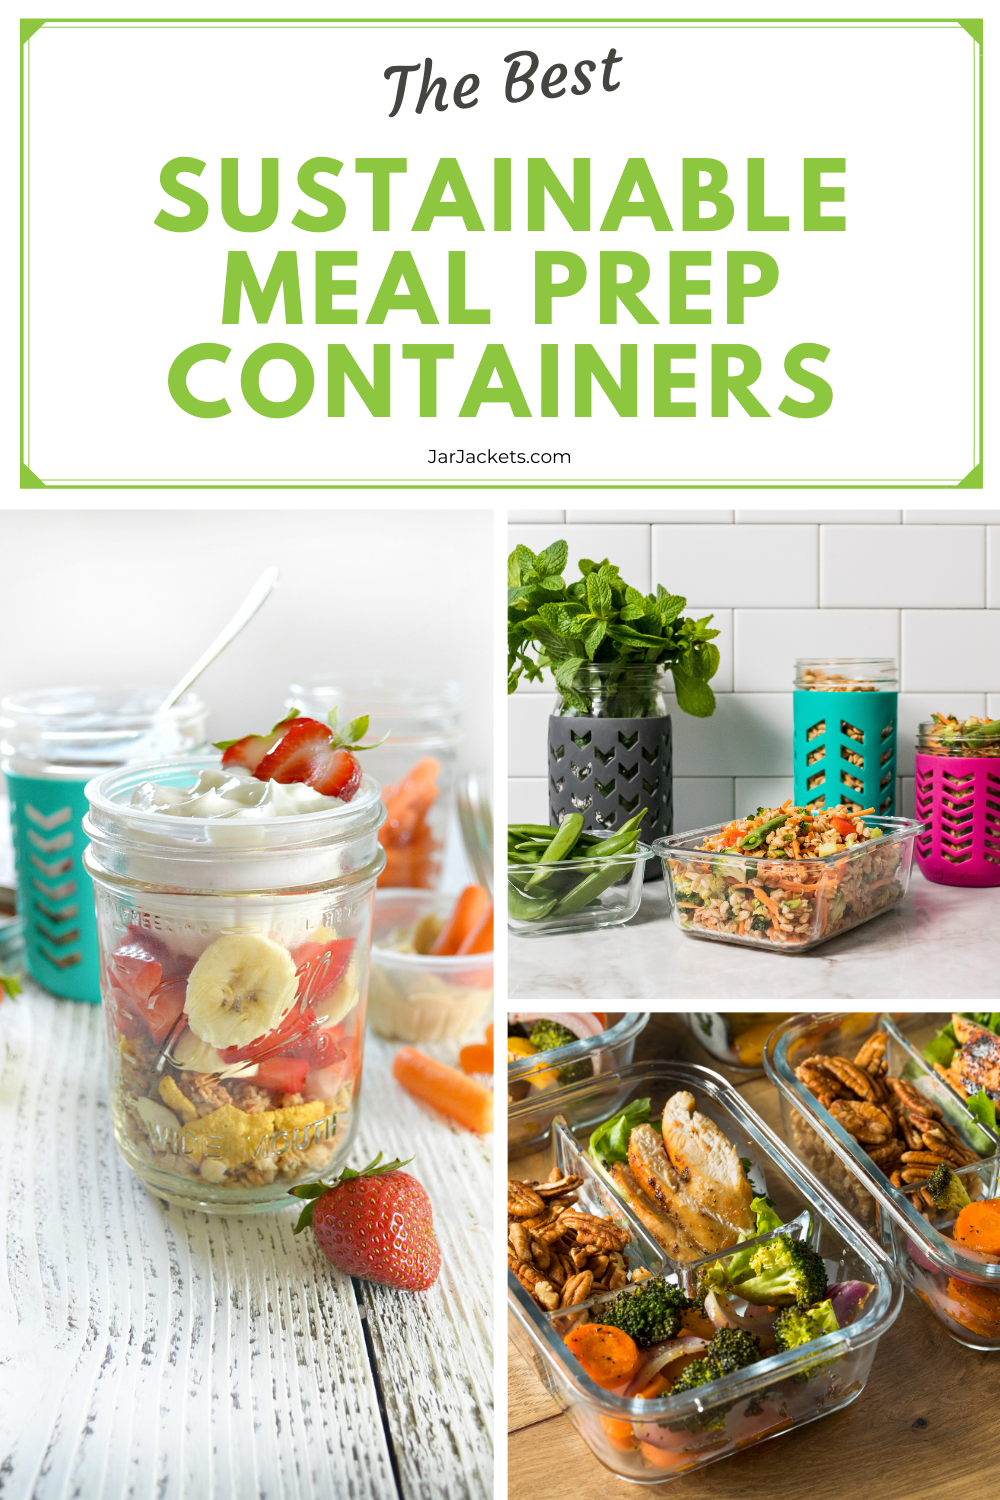 The Best Glass Meal Prep Containers